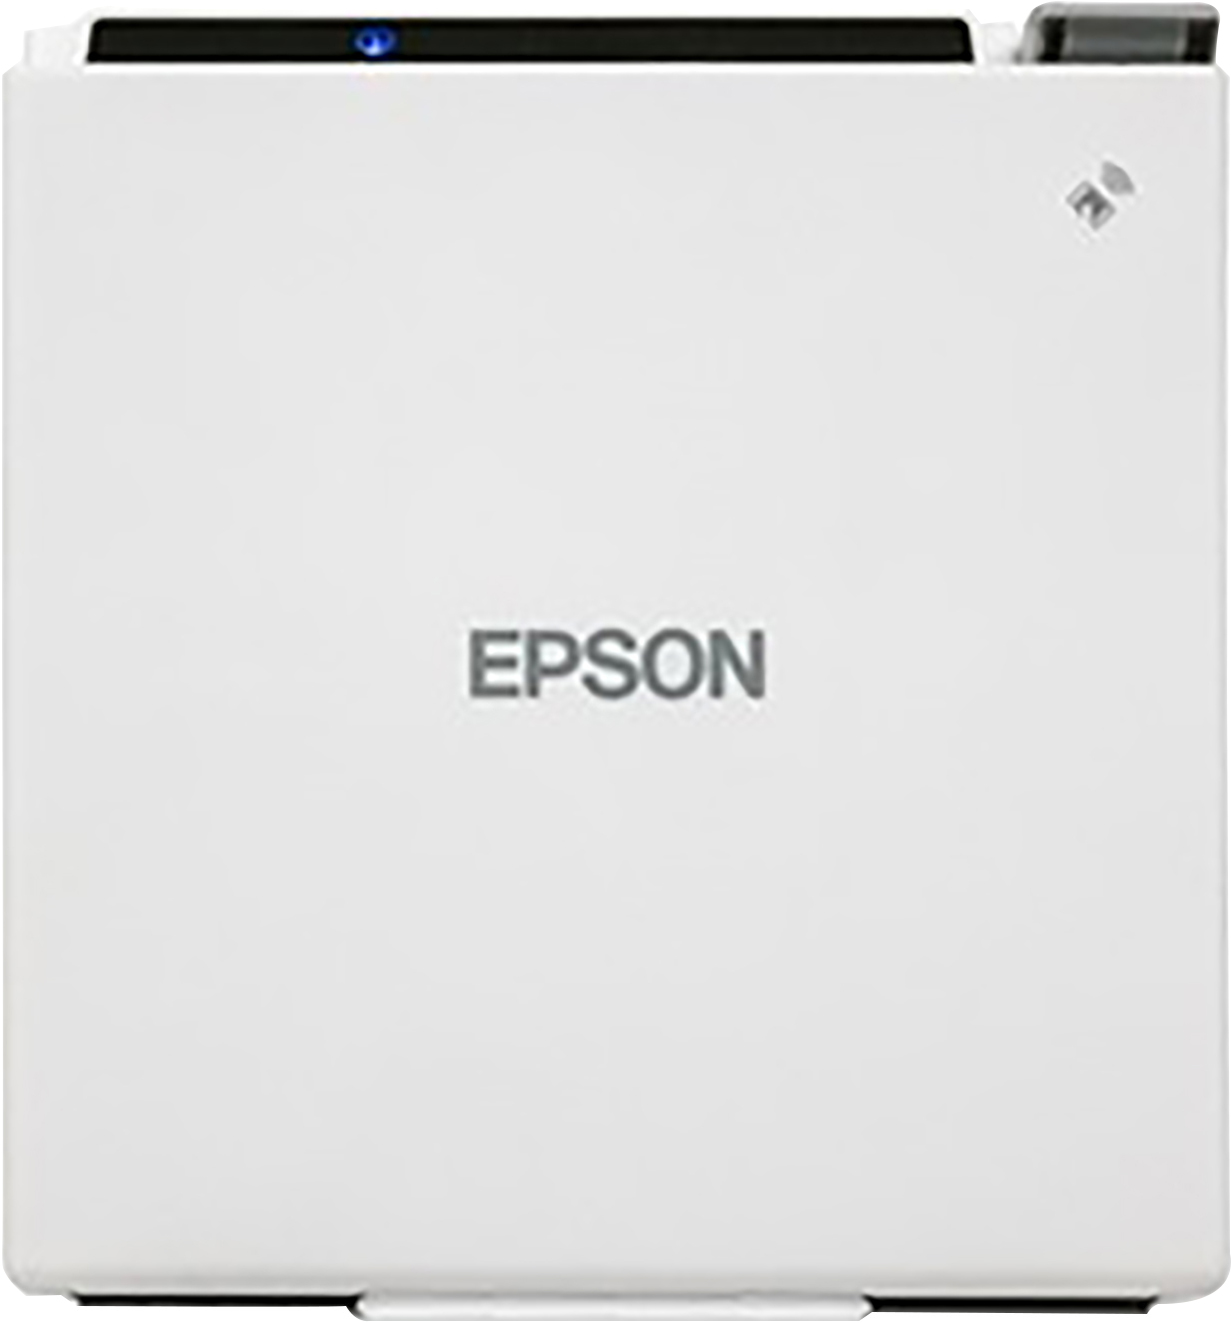 Epson TM-m30 - Receipt printer - thermal line - Roll (3.13 in) - 203 dpi - up to 472.4 inch/min - USB 2.0, LAN, NFC - cutter - ultra white